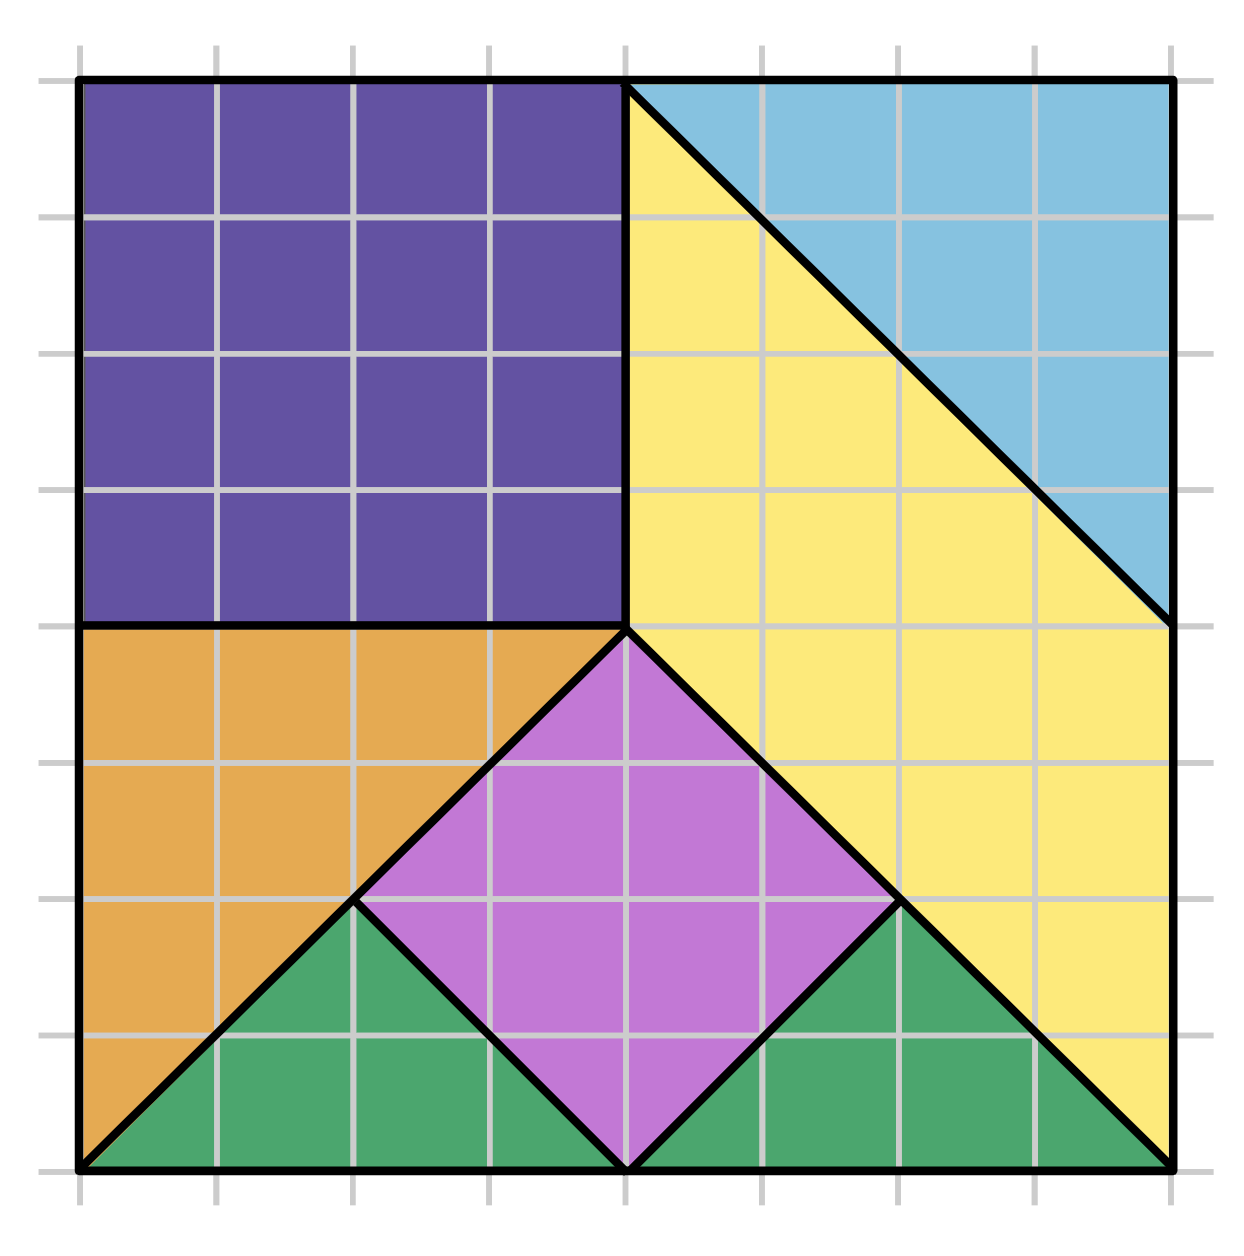 An eight by eight unit square is divided into different coloured fractional parts in a variety of sizes: A yellow parallelogram and purple square that are 16 square units each, an orange triangle, blue triangle, and pink square that are 8 square units each, and two green triangles that are 4 square units each.